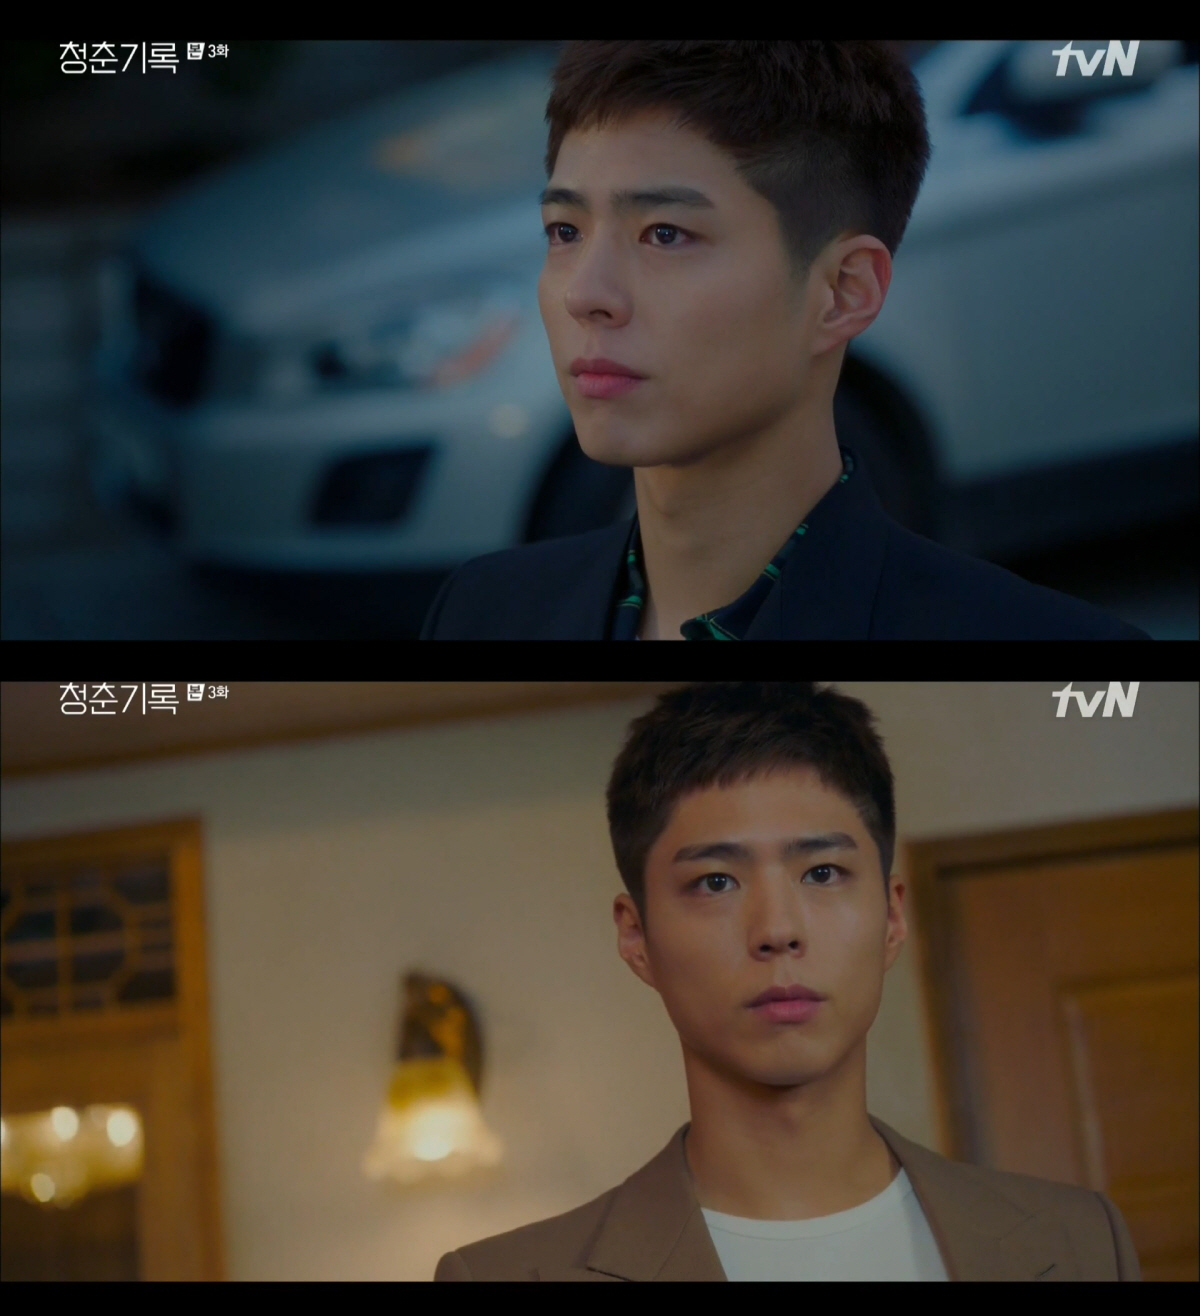 In the third episode of Record of Youth, Park Bo-gum (played by Sa Hye-joon) presented the self-portrait of youth in the Border between dreams and reality, between love and friendship as a shrewd inner act.Park Bo-gum was determined to go to the army after falling into the movie audition he wanted, but he was rich without letting go of his passion and hope for his dreams.Moreover, he learned of the situation in which his friend Byun Woo-seok (played by Won Hae-hyo) gave consideration to the media pictorials so that he could take pictures together, and his mind became complicated by various Feelings that he did not know.Shin Dong-mi (played by Lee Min-jae), who claims to be a manager, also refused neatly, but he did not stop the inner conflict after that.Eventually, he faced his mind and vowed to challenge Actor again, foreshadowing a breakthrough in his dream.Park Bo-gum in the play expressed the Feelings of Sa Hye-joon, who conflict between dreams and reality that he wanted to achieve, with a tight inner Acting, leaving a deep lull.Also, in the relationship with Park So-dam (played by Ahn Jeong-ha), he attracted attention by conveying the Feelings of Border between love and friendship.The two people who have shared a lot of short time are becoming comforting and hopeful through each other.This relationship beyond simple excitement expresses another hope and courage in our lives.Park Bo-gum is not just a thrill, but also expresses dreams, hopes and self-portraits of youth convincingly and amplifies immersion.On this day, Park Bo-gum is said to have increased his immersion by expressing various Feelings that are not hopeful or hopeless in the middle of dreams and reality with tight inner Acting.